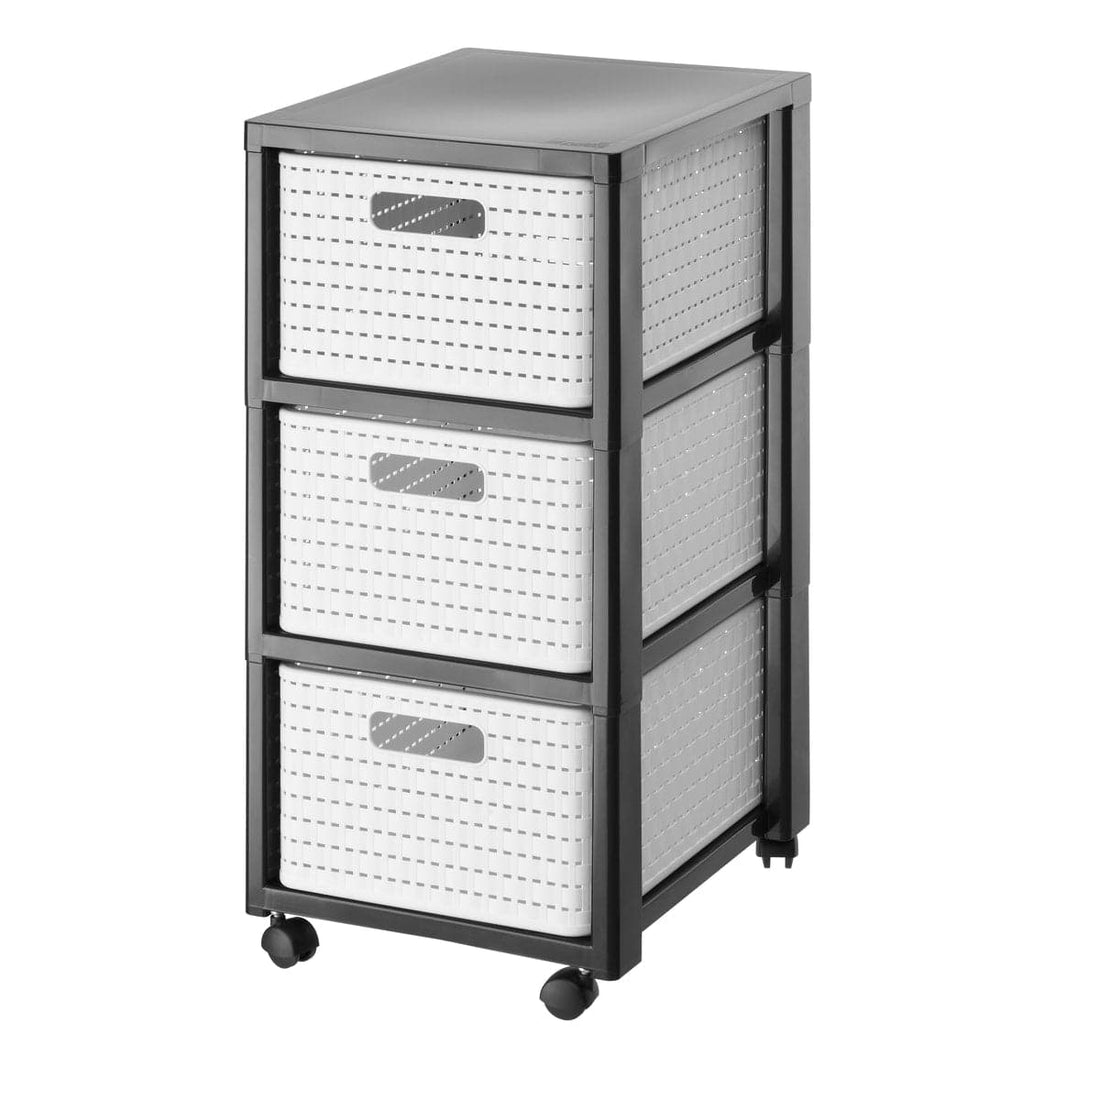 CHEST OF DRAWERS 3 DRAWERS 18LT REMOVABLE BRISEN 4 WHEELS ANTHRACITE/BCO 37,5X32,5X71,2CM - best price from Maltashopper.com BR410005883